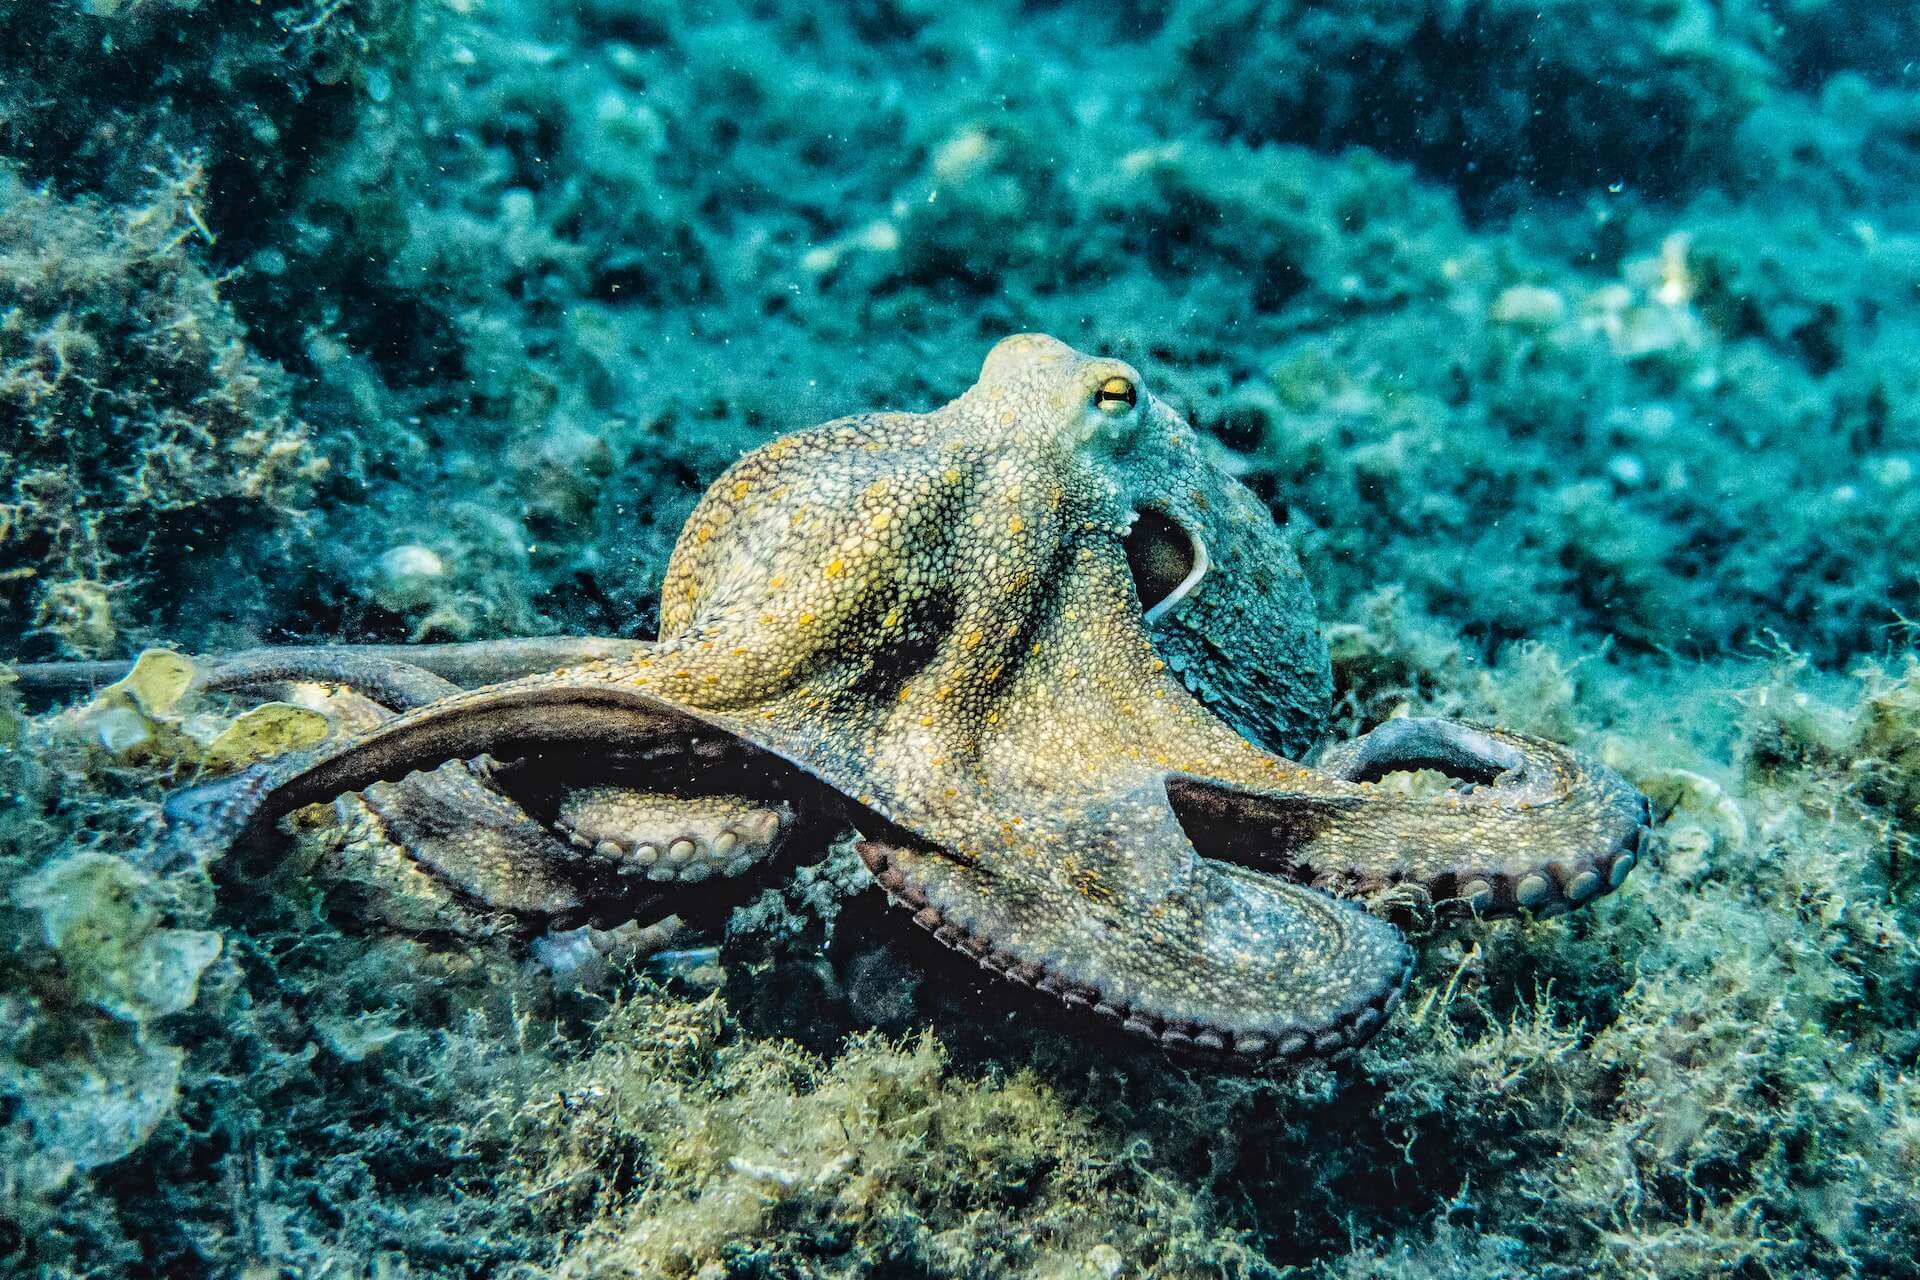 octopus by the corals